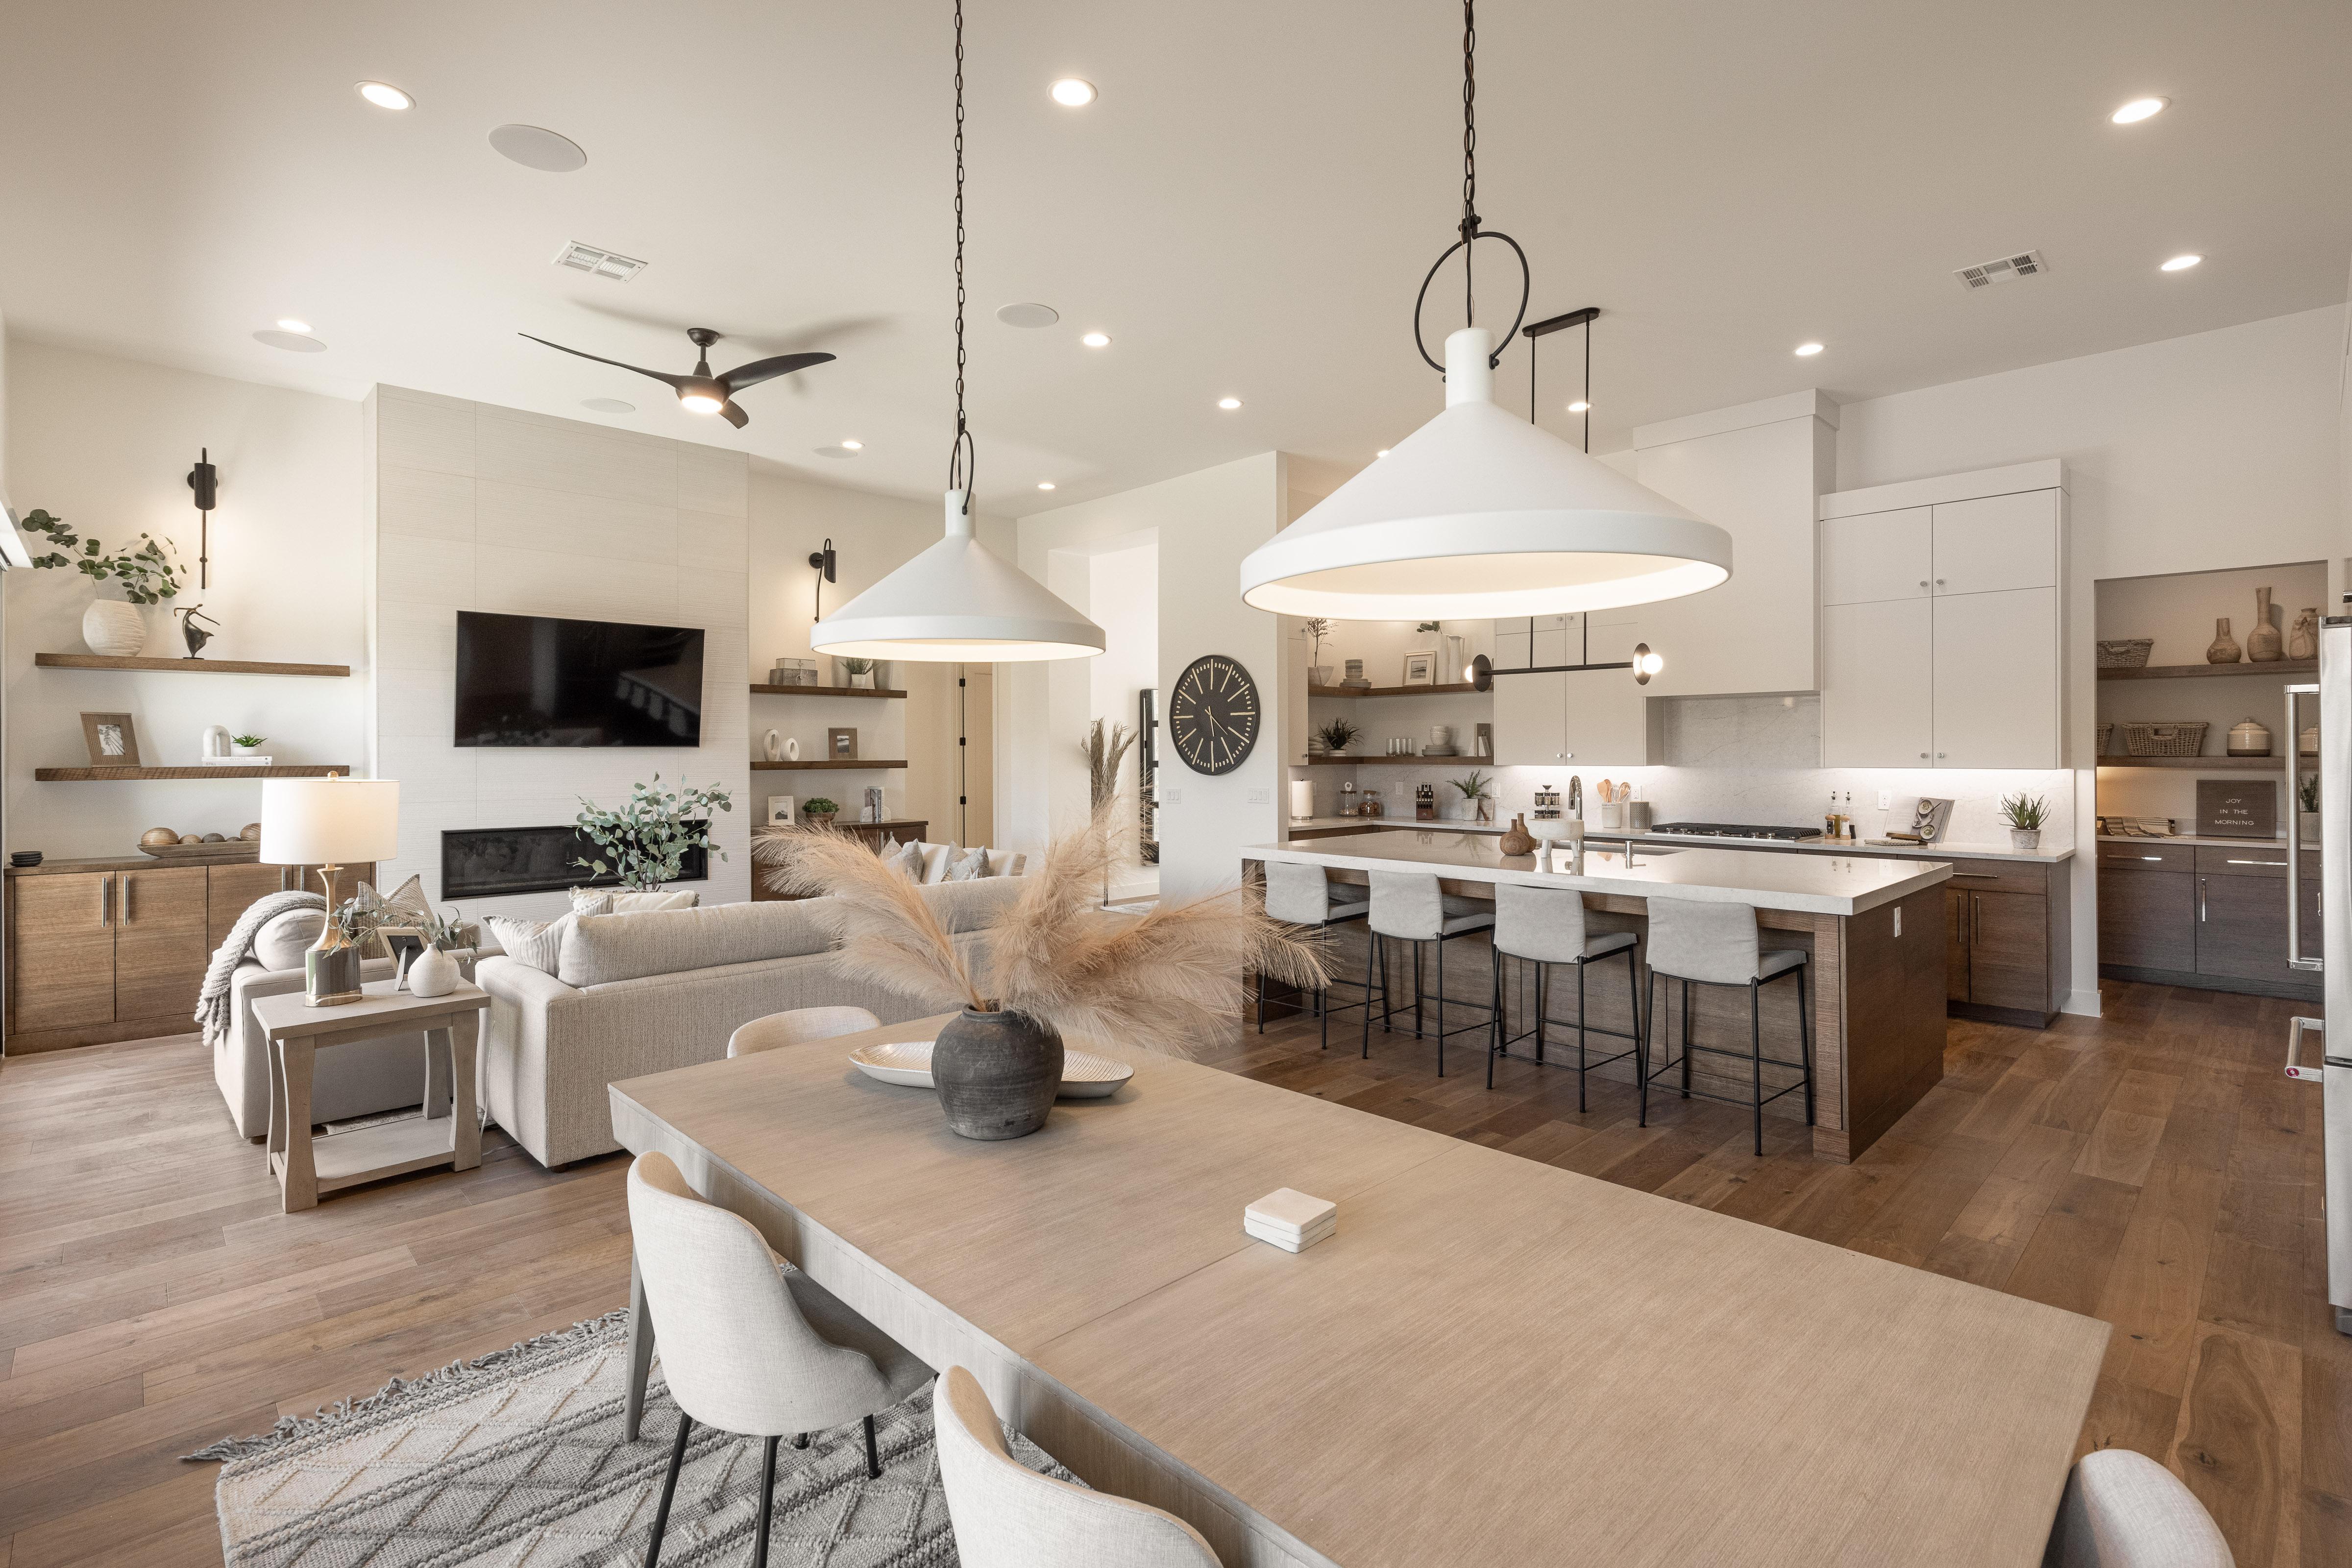 With an open and spacious floor plan, the Dining Room and Kitchen can accommodate meal preparations for groups large or small. 